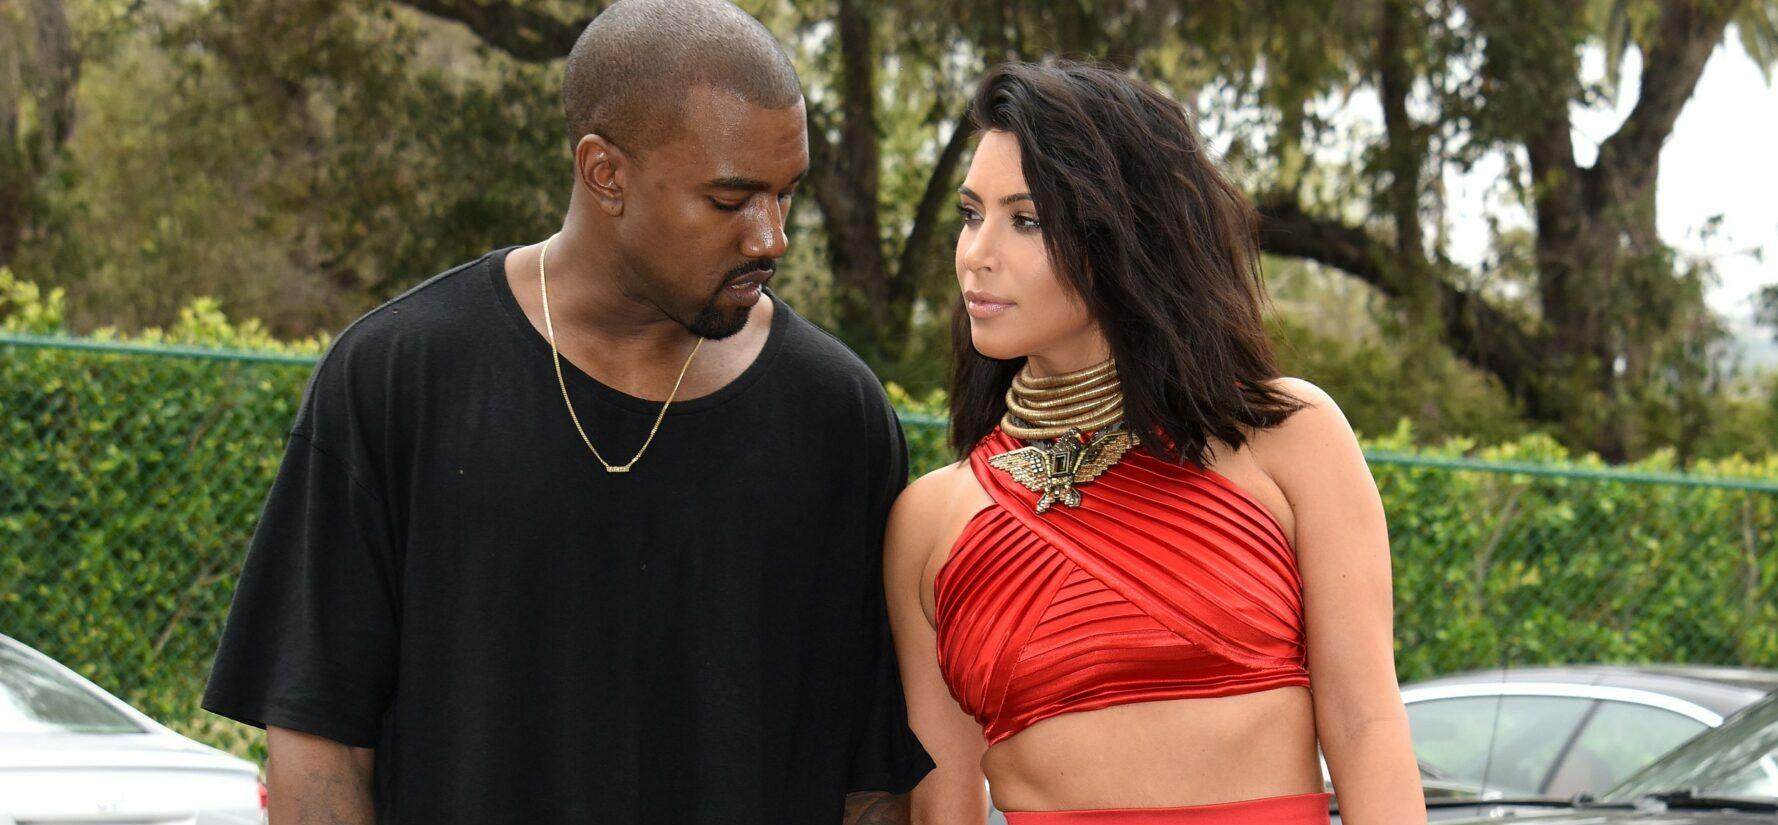 Kim Kardashian Continues To Push For Divorce From Kanye, Cites ‘Emotional Distress’